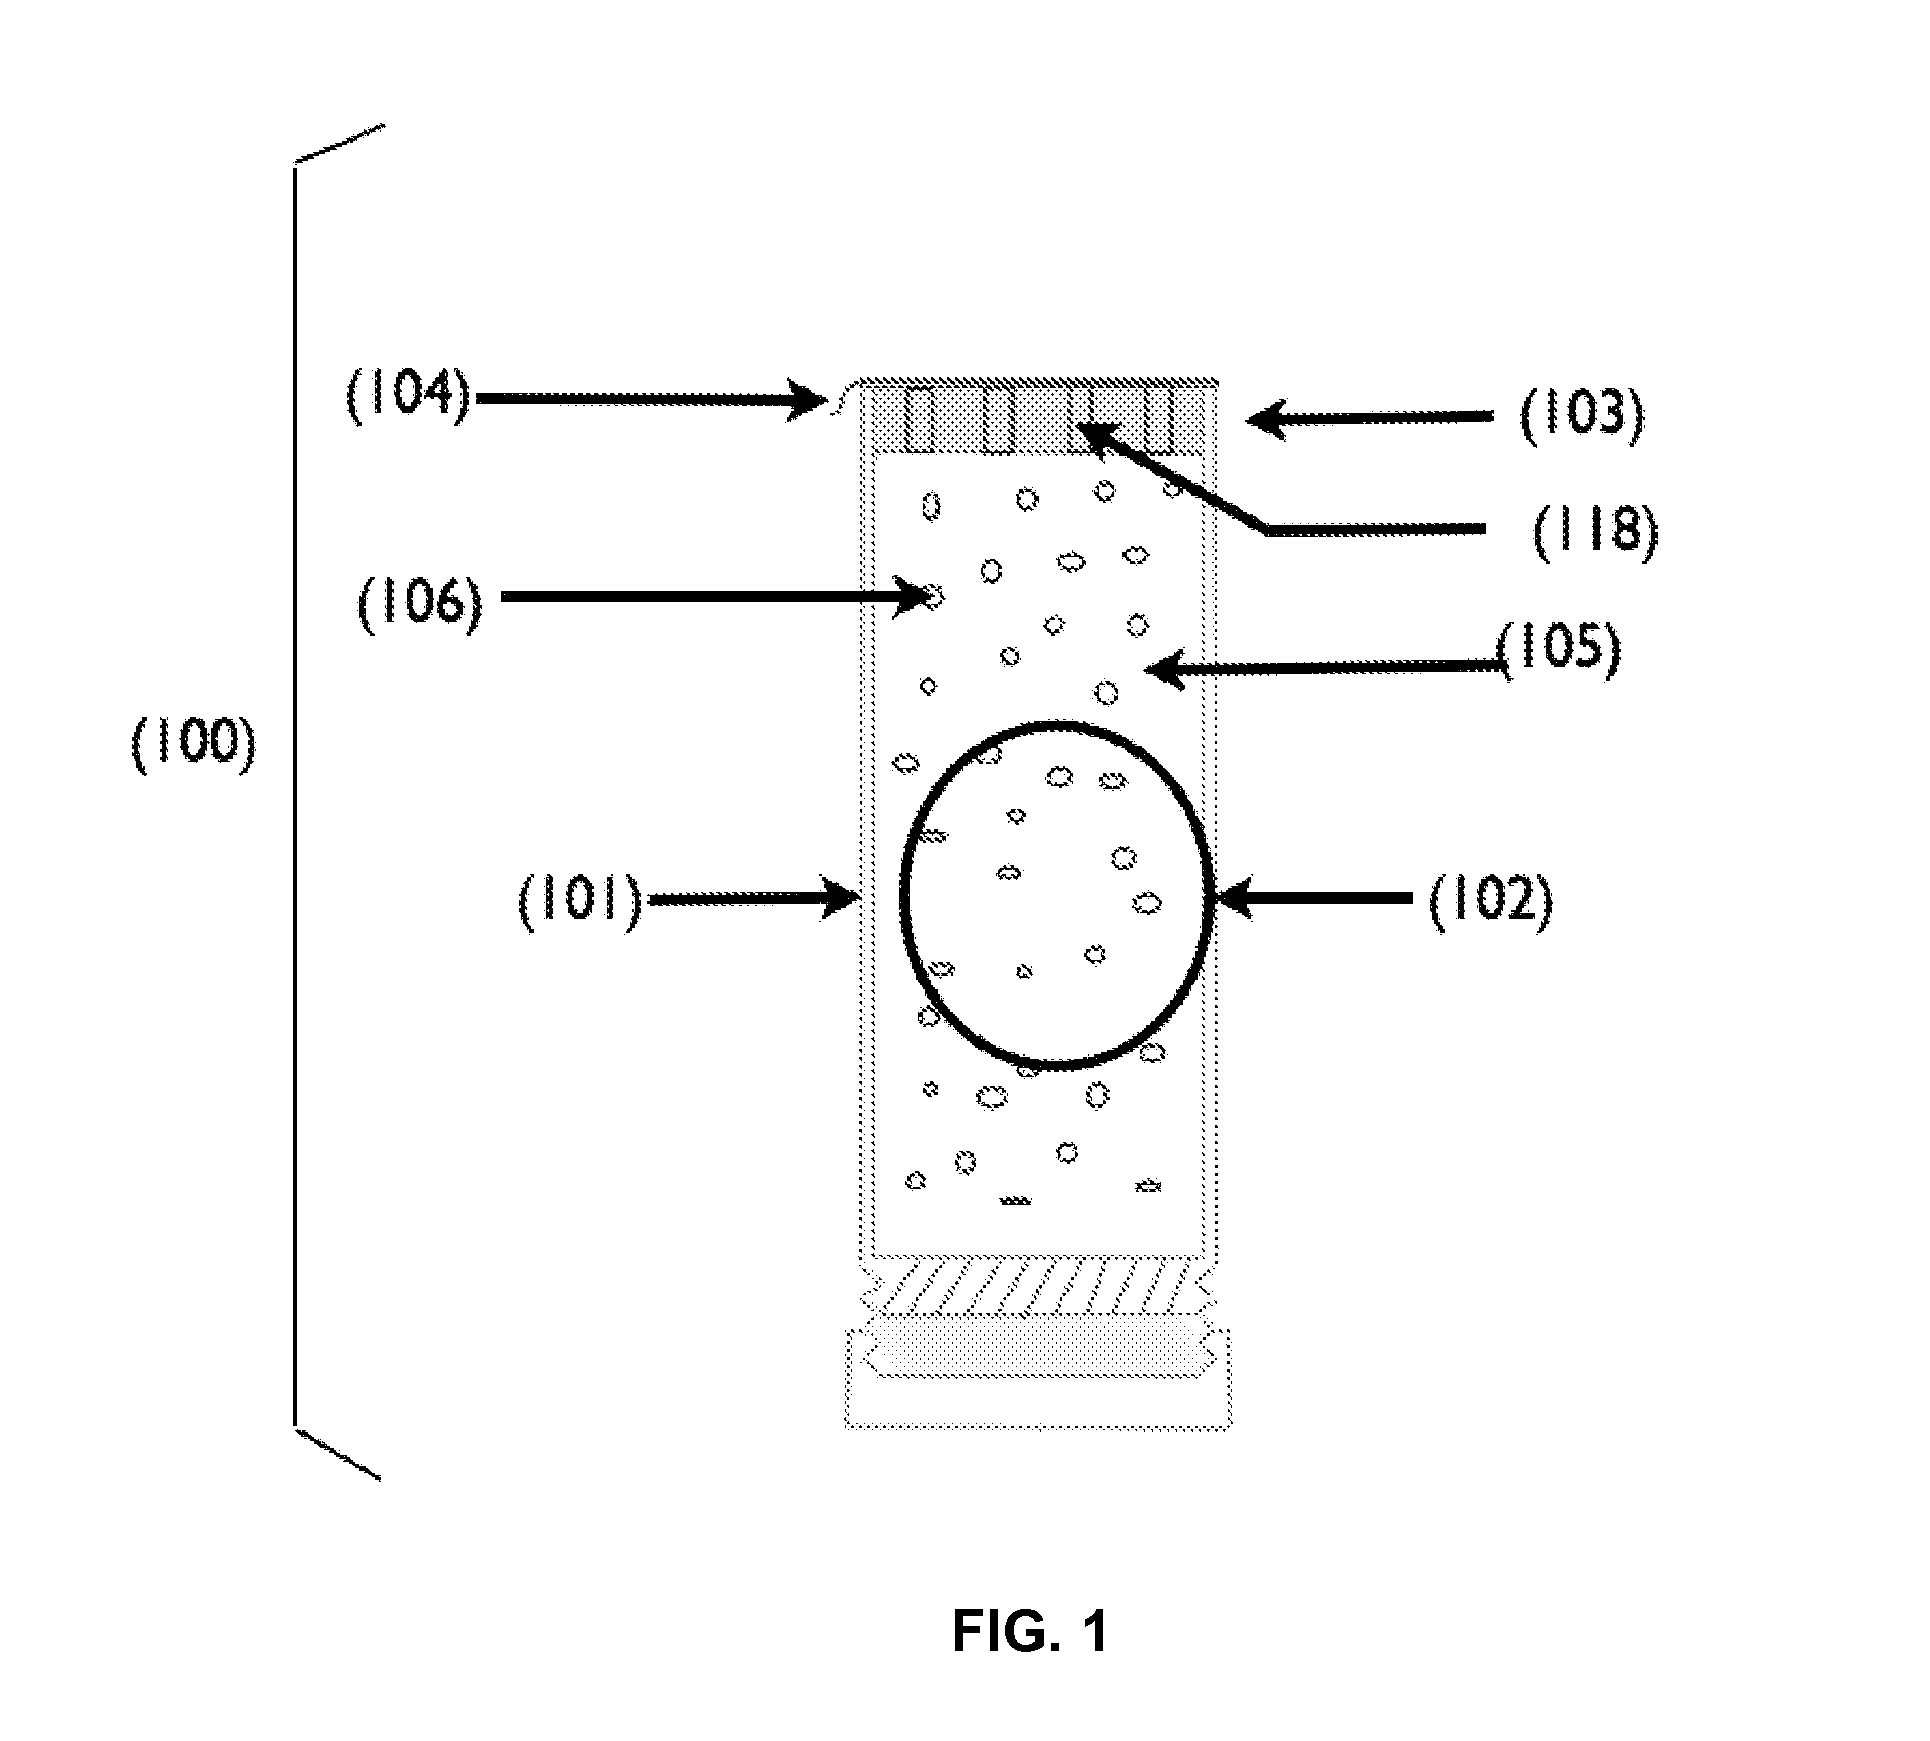 Apparatus and Method for Controlled Release of Botanical Fumigant Pesticides